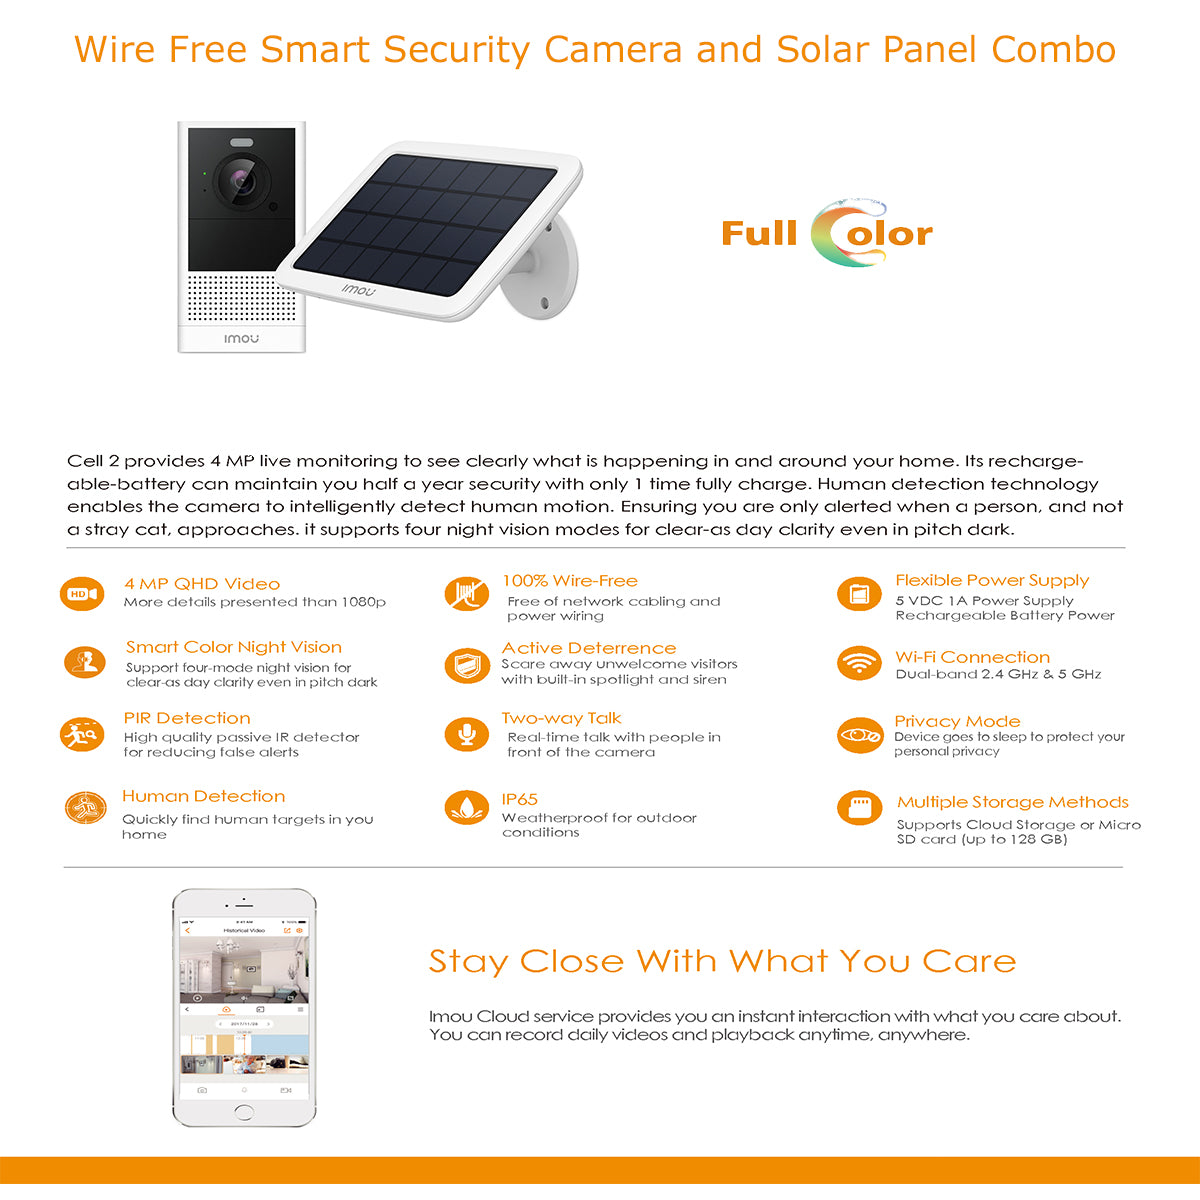 Imou Cell 2 4MP Battery Operated Wi-Fi Camera + Solar Panel Kit IPC-B46LP-White and FSP11 Cell 2 and Solar Panel Product Features CC473-6 and PS470 